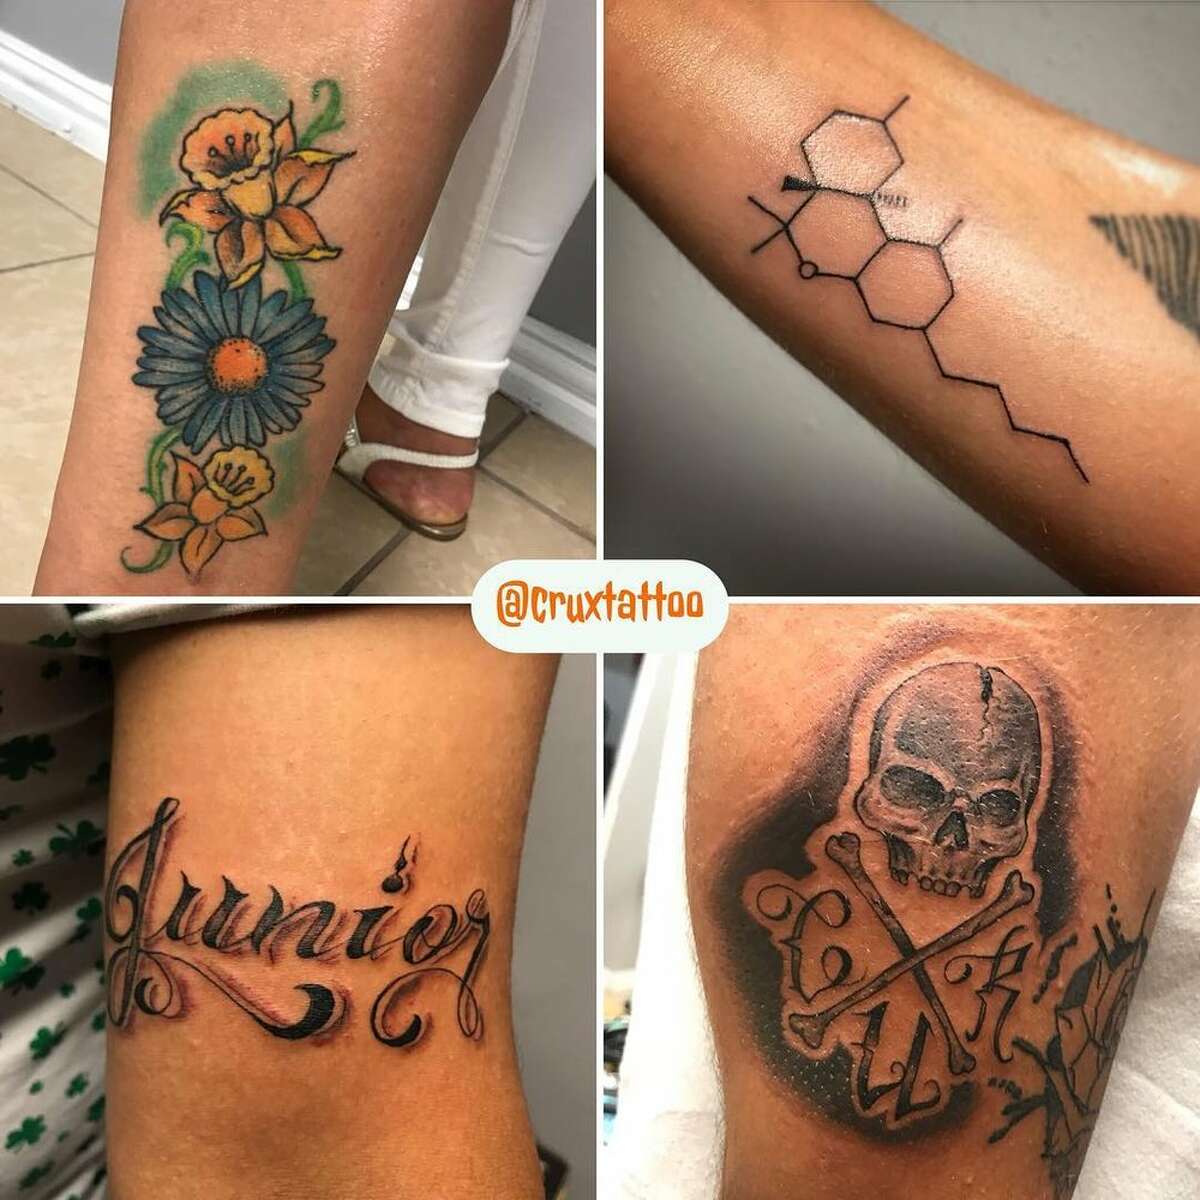 The Top Rated Tattoo Shops Around Houston According To Yelp